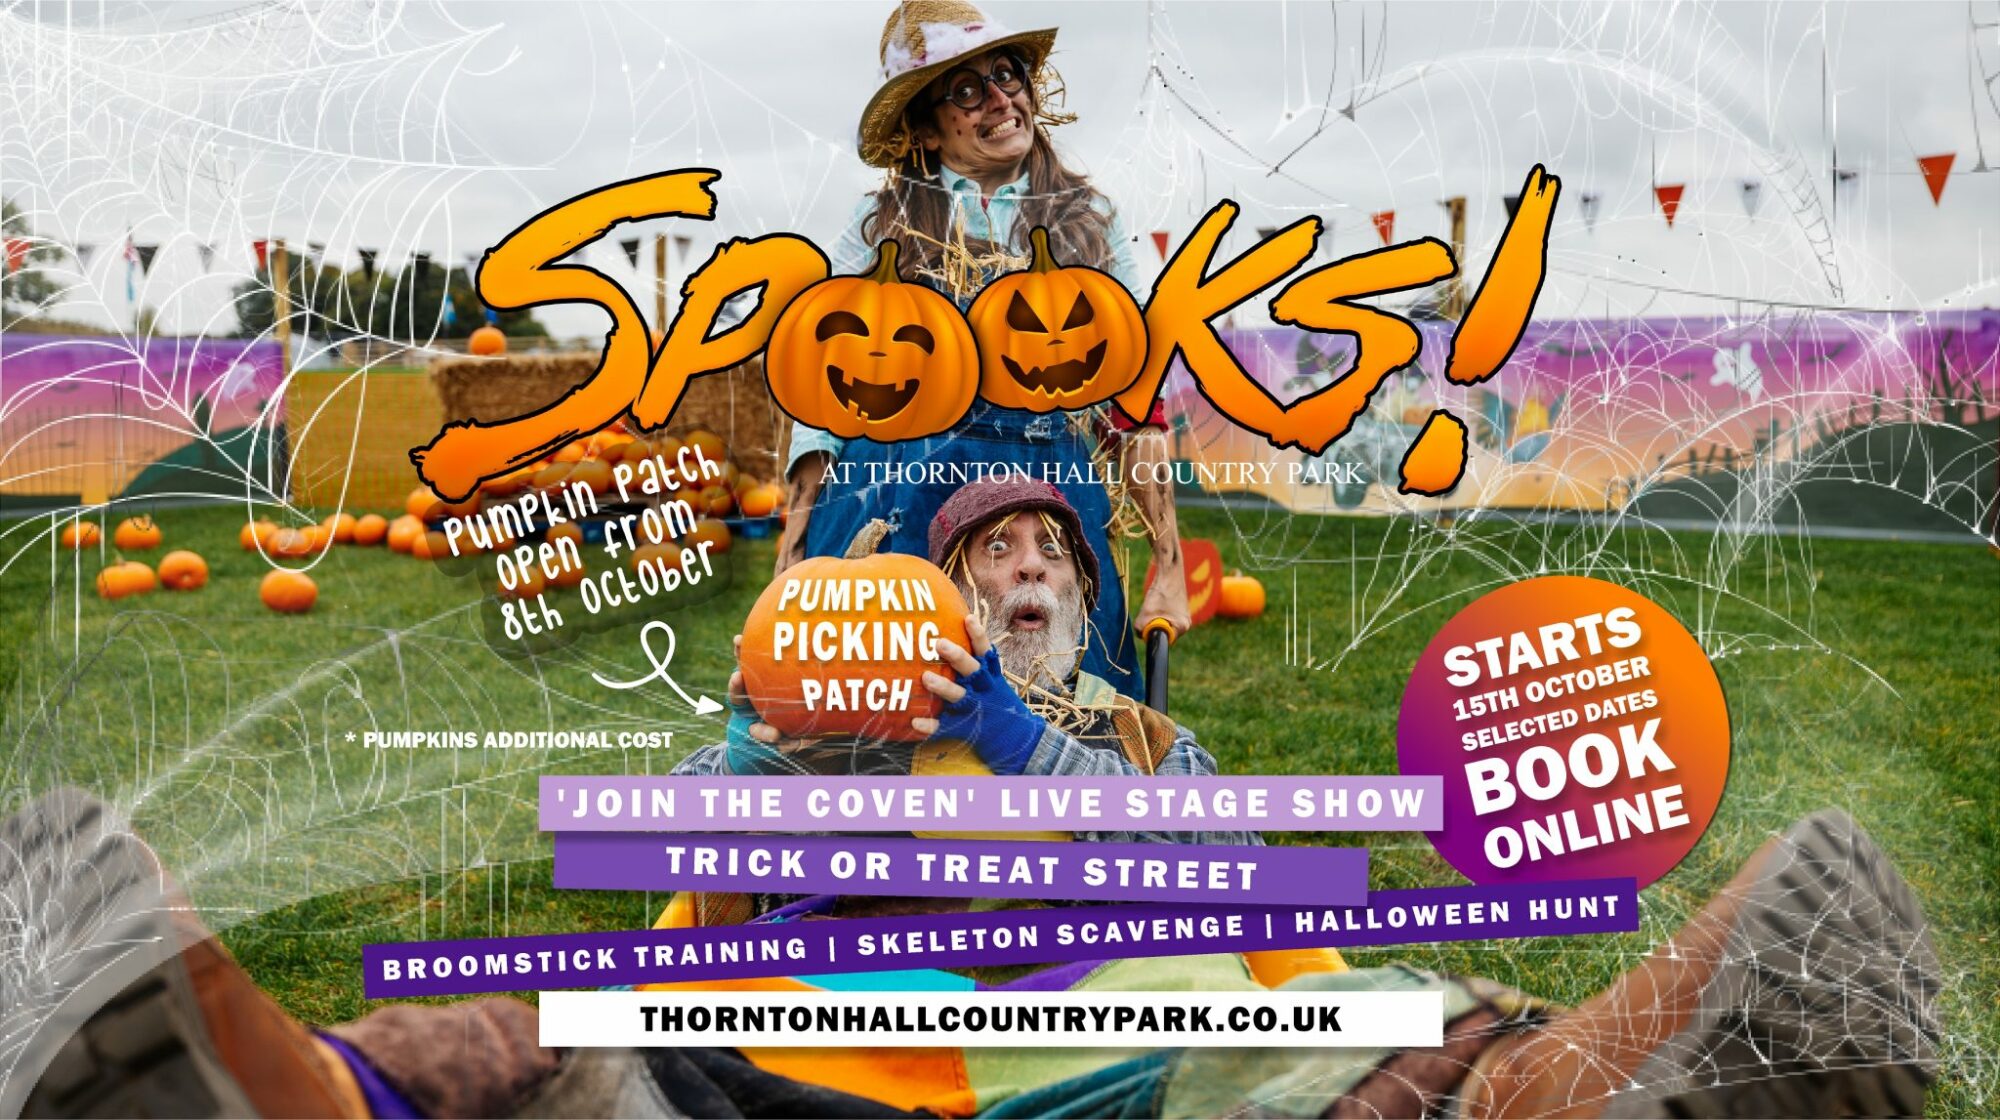 Image name spooks thornton hall country park the 4 image from the post Halloween in Yorkshire 2022 in Yorkshire.com.